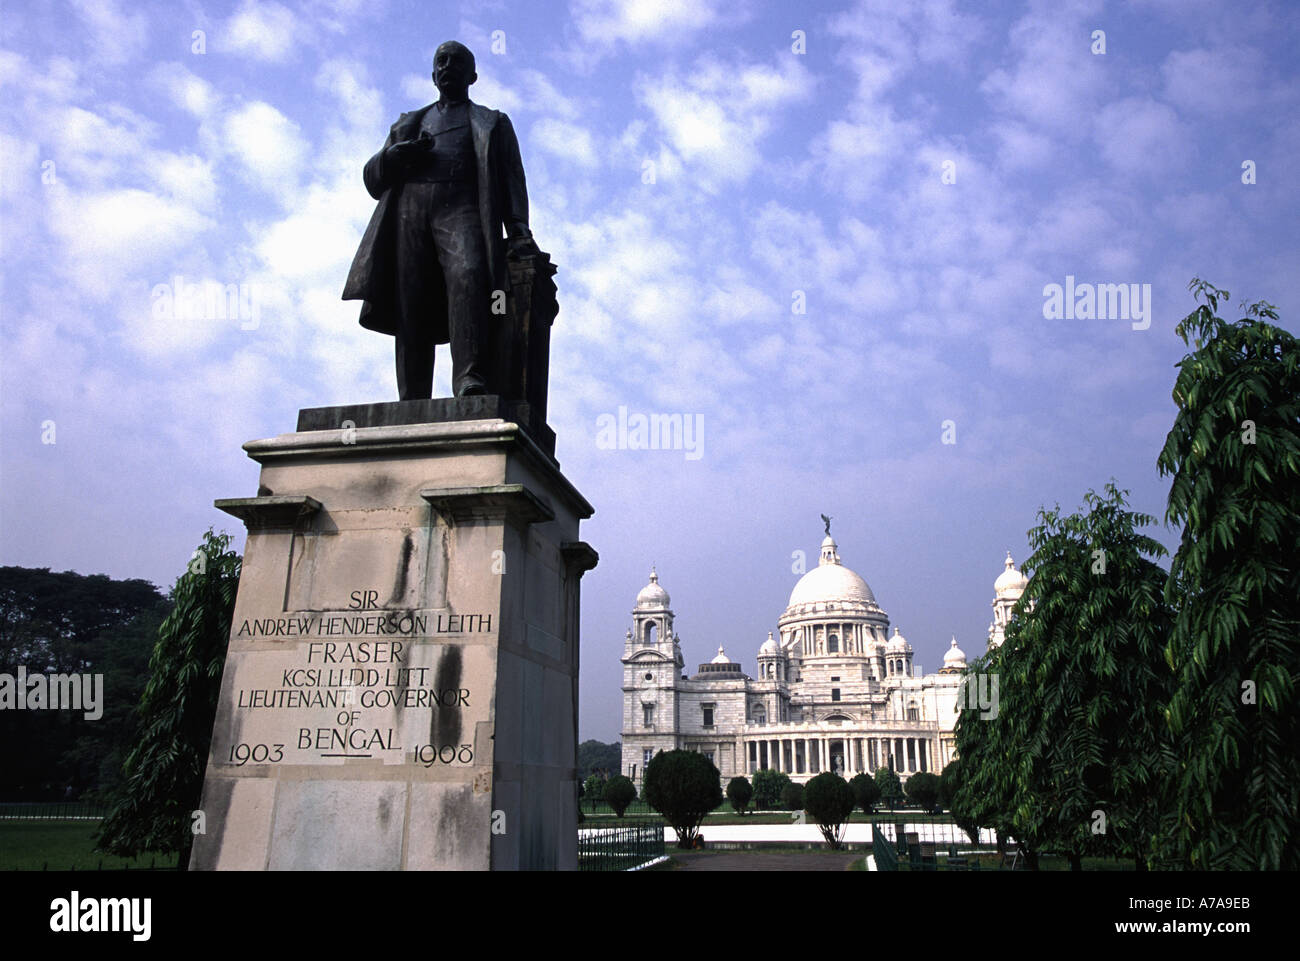 Statue of Sir Andrew Henderson Leith Fraser in front of the Victoria Memorial Hall in Calcutta West Bengal India Stock Photo